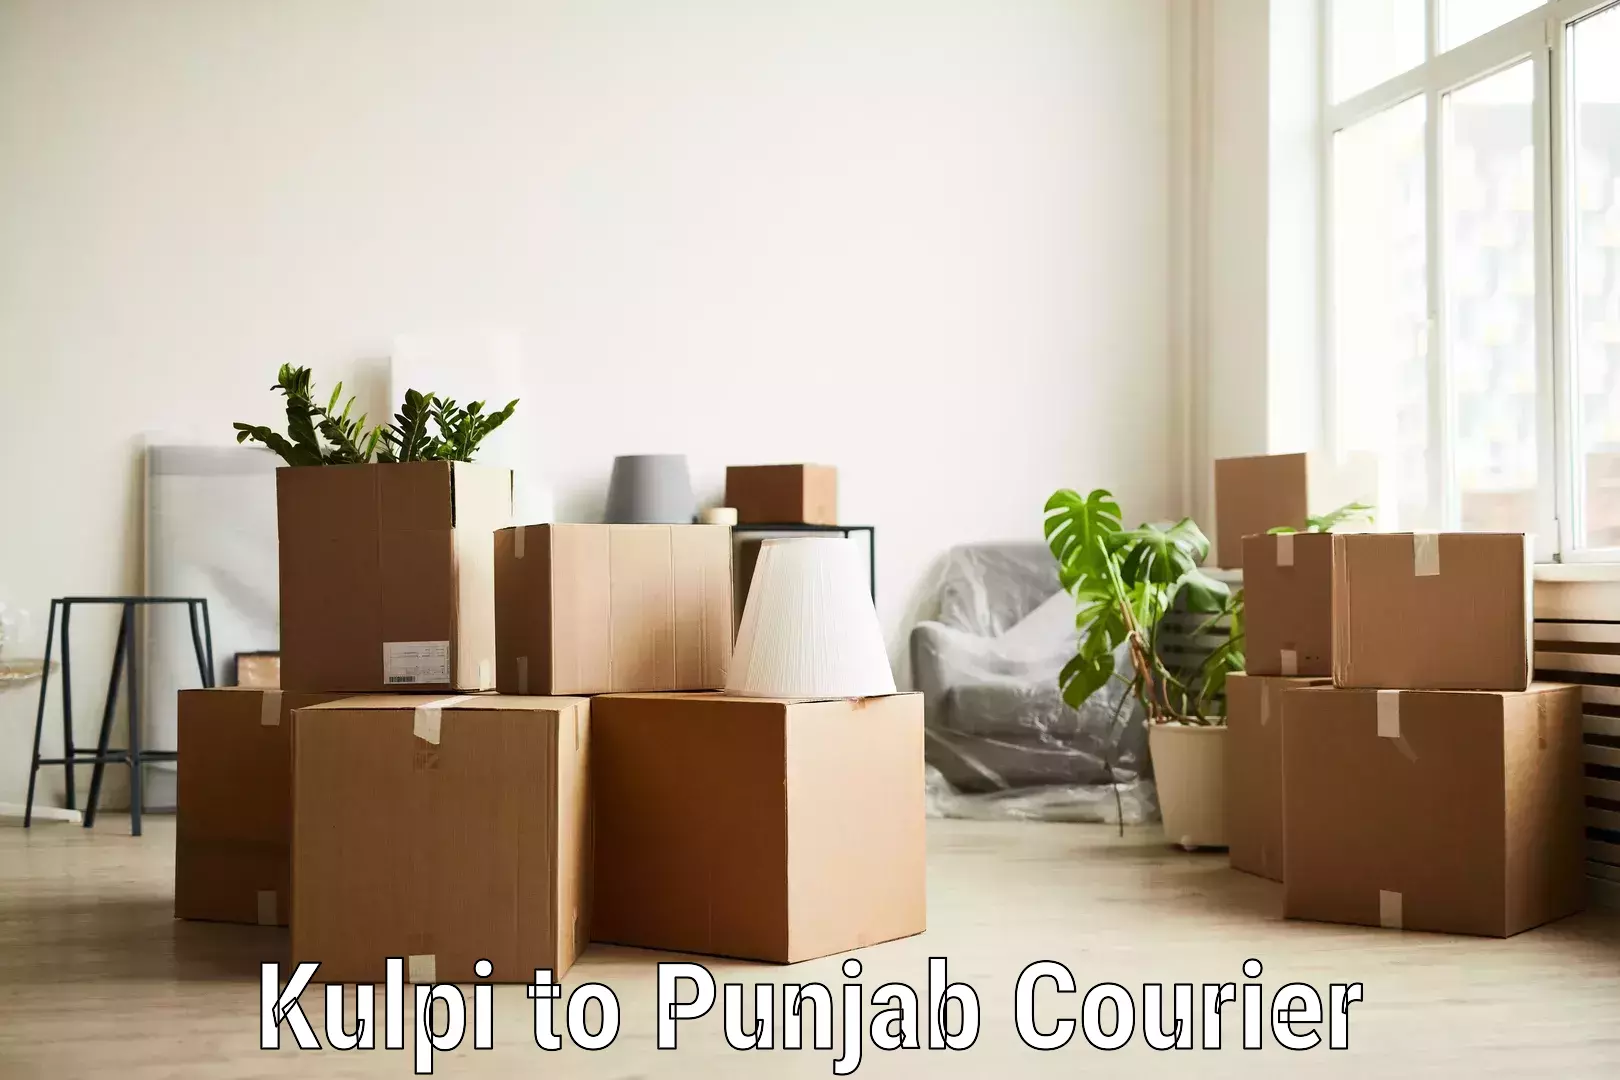 Overnight delivery services Kulpi to Punjab